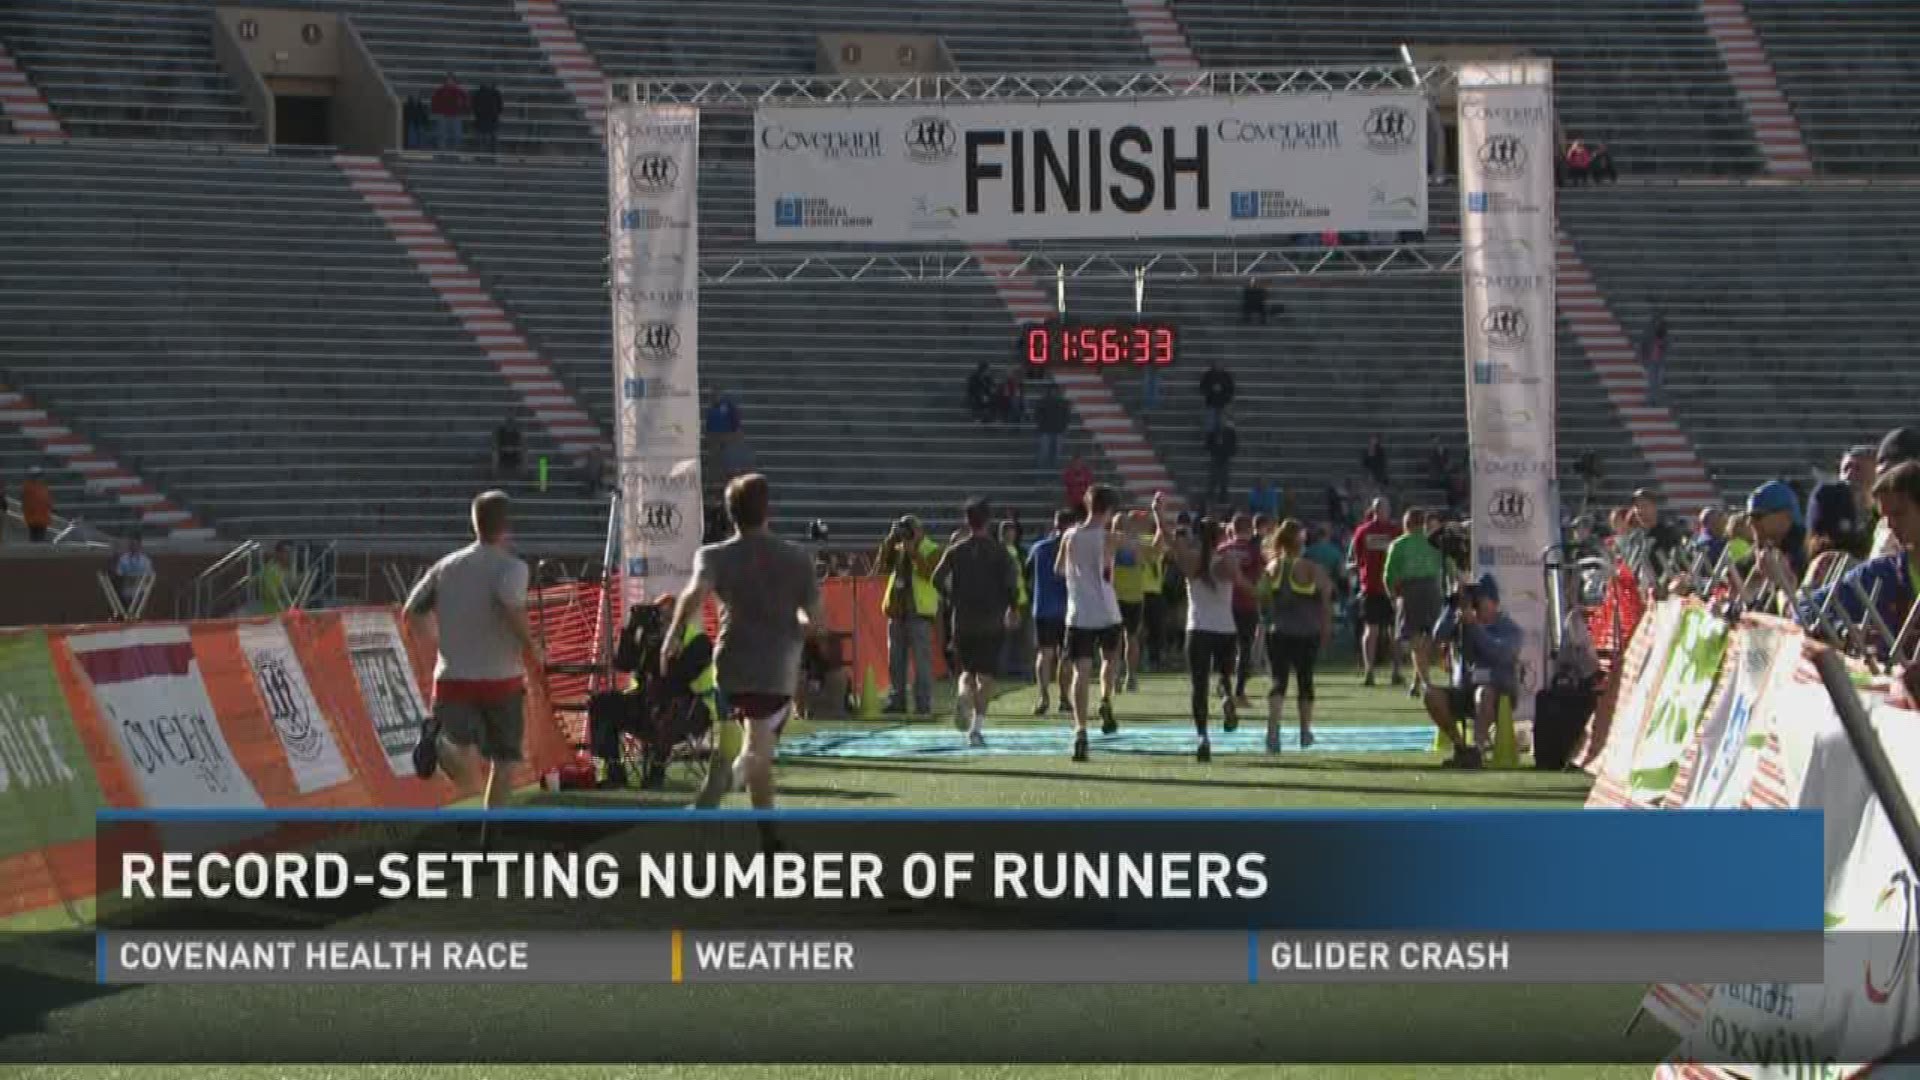 Thousands came out to run in the 13th Covenant Health Knoxville Marathon this weekend.